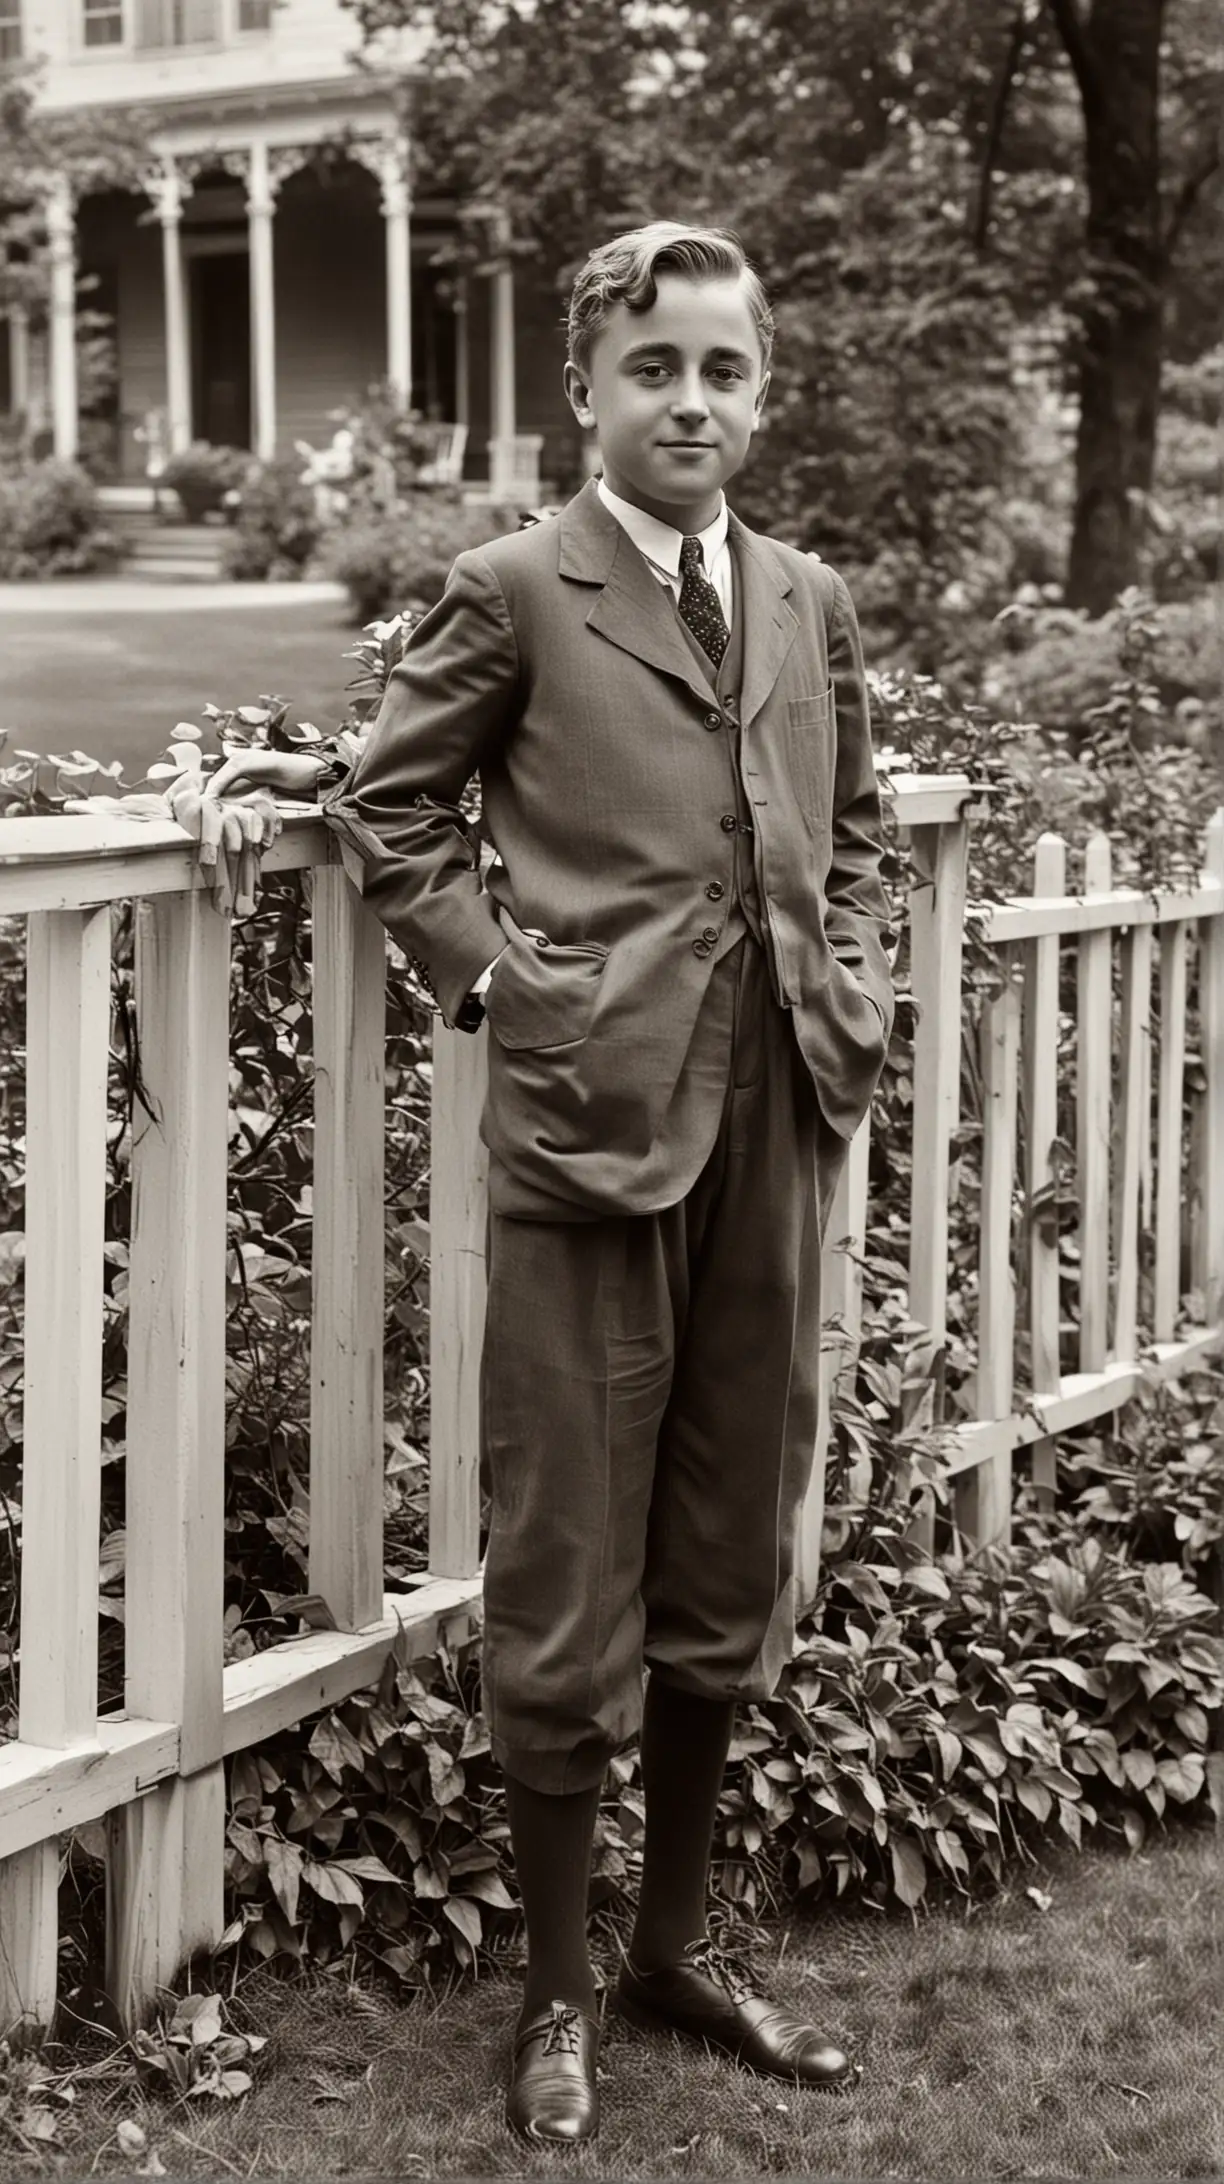 Childhood and Early Life: A young Franklin Roosevelt, around age 10, at his family’s estate in Hyde Park, New York. He is playing by the Hudson River, surrounded by lush greenery and Victorian-style architecture, showcasing his privileged upbringing.